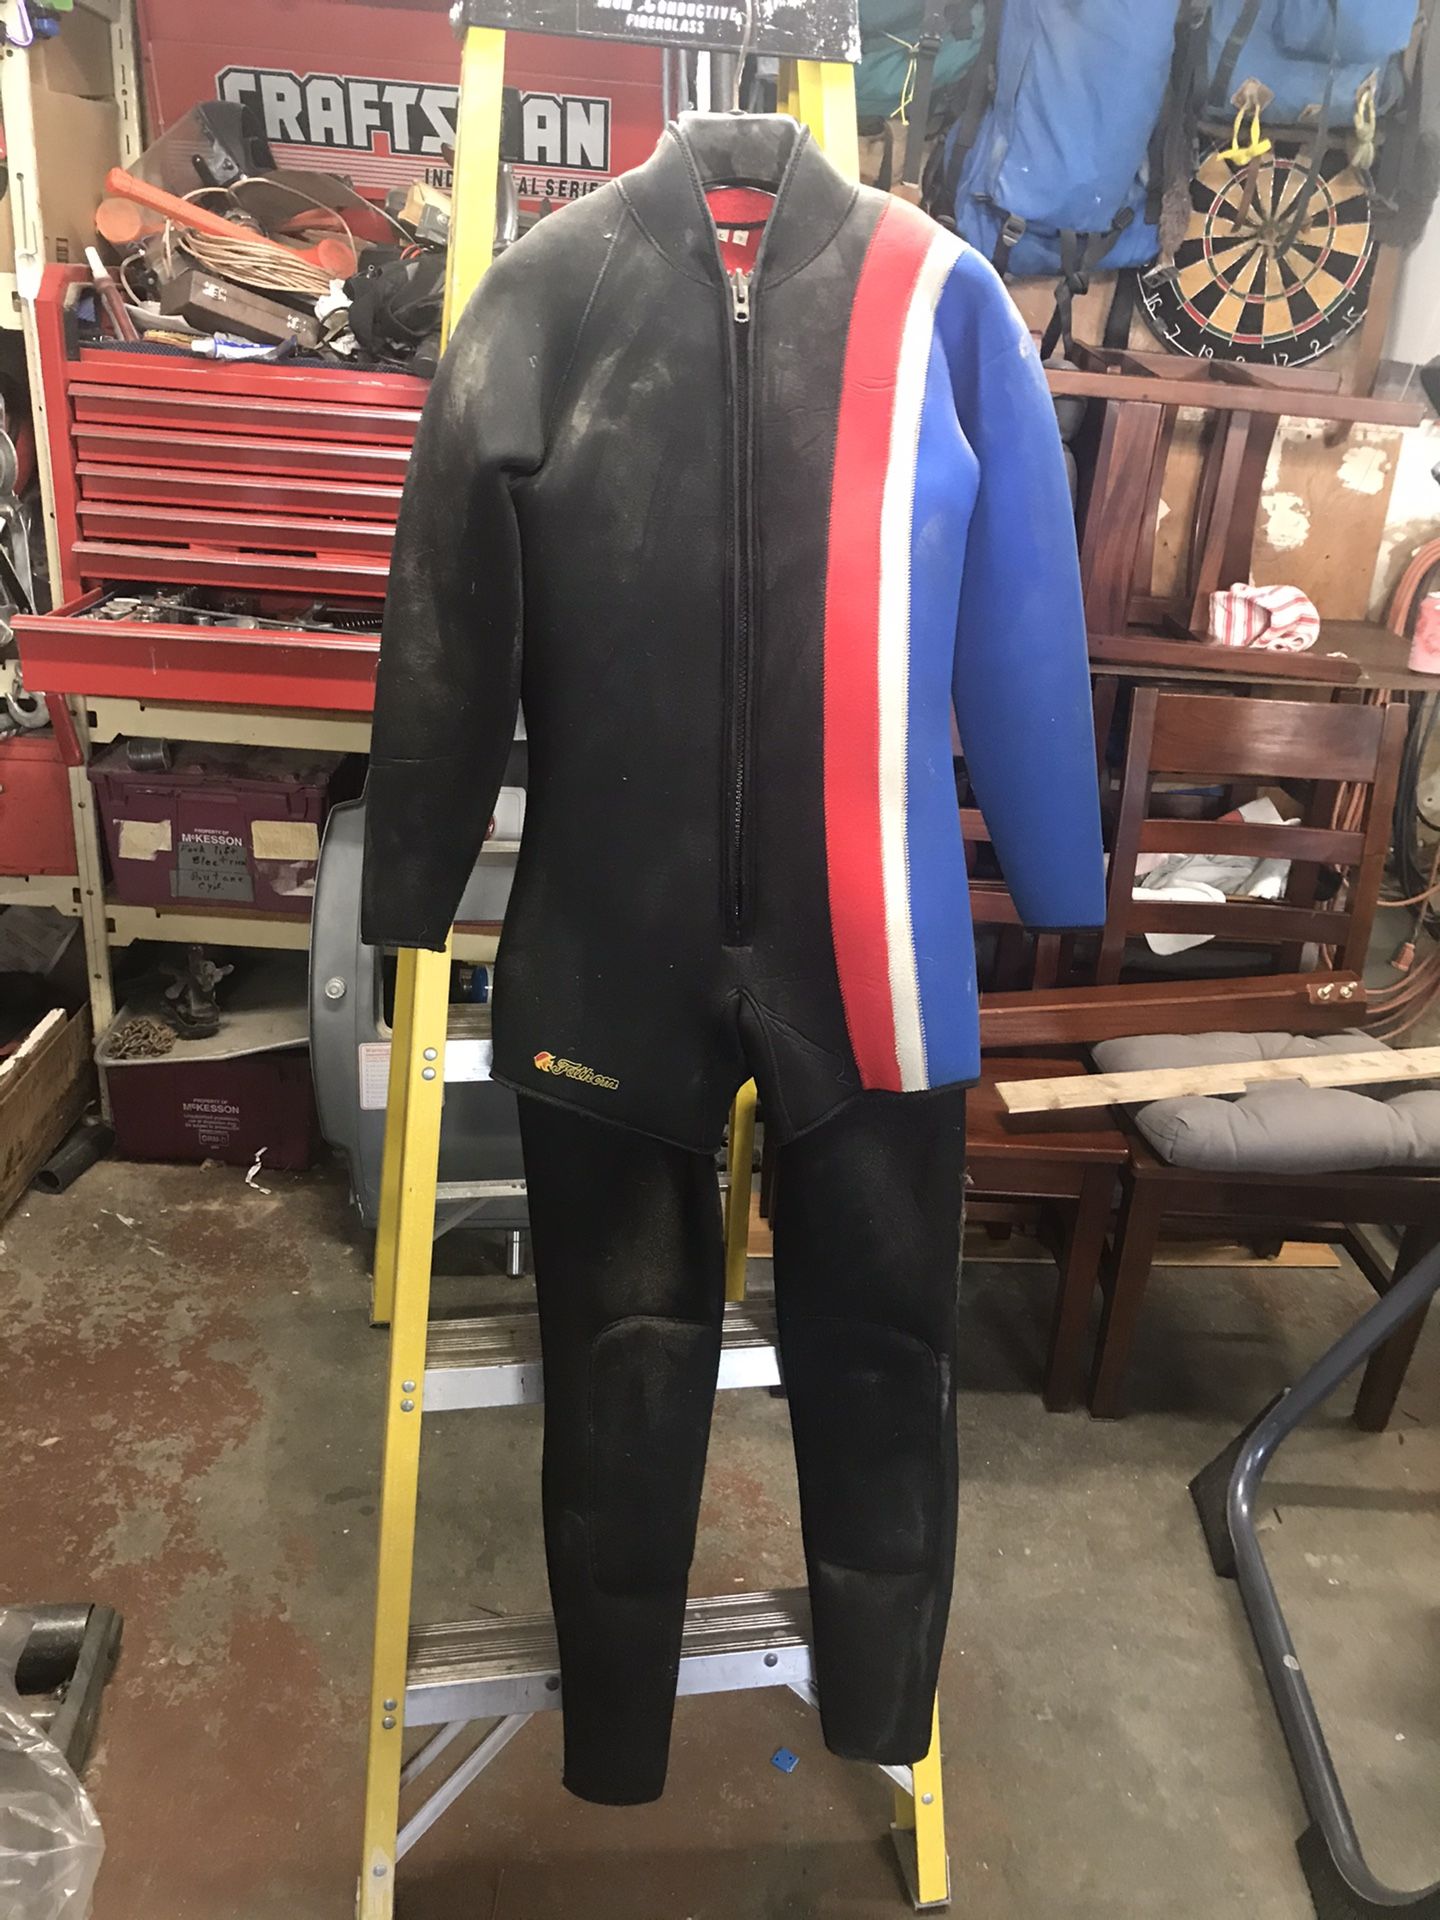 Free Wetsuit